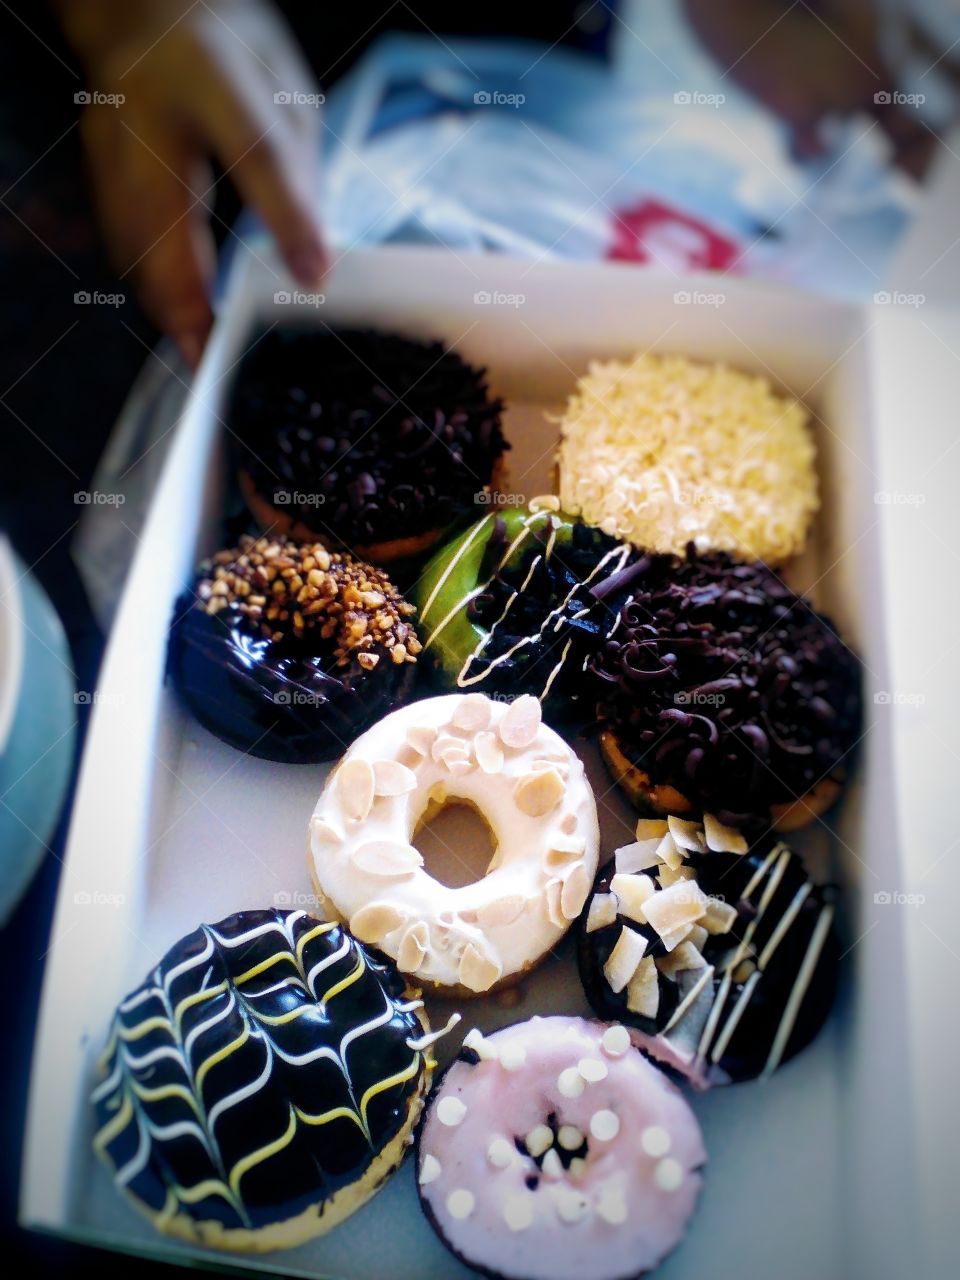 Sweet and delicious donuts.